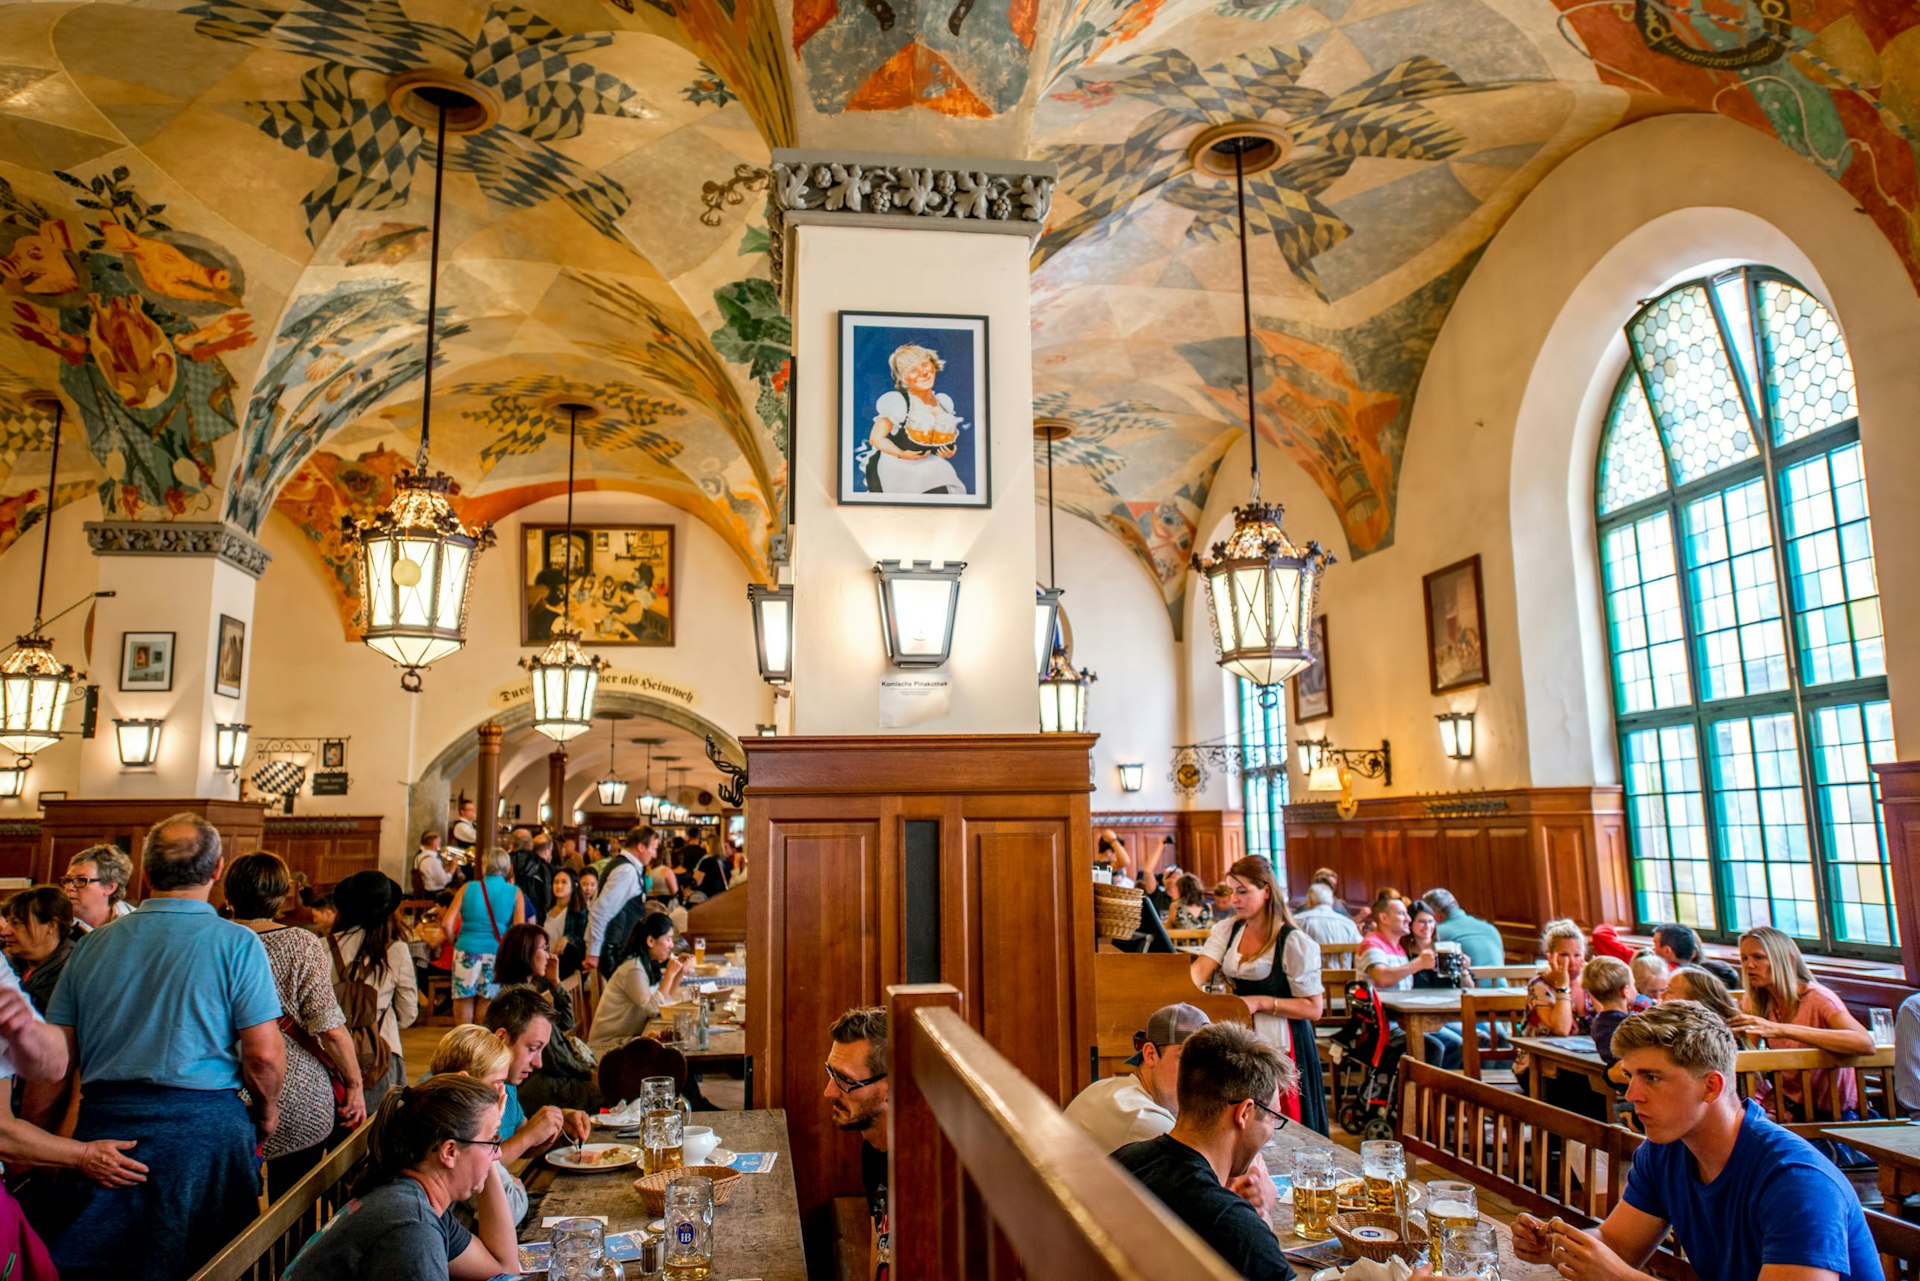 Crowded interior of the Hofbrauhaus pub in Munich